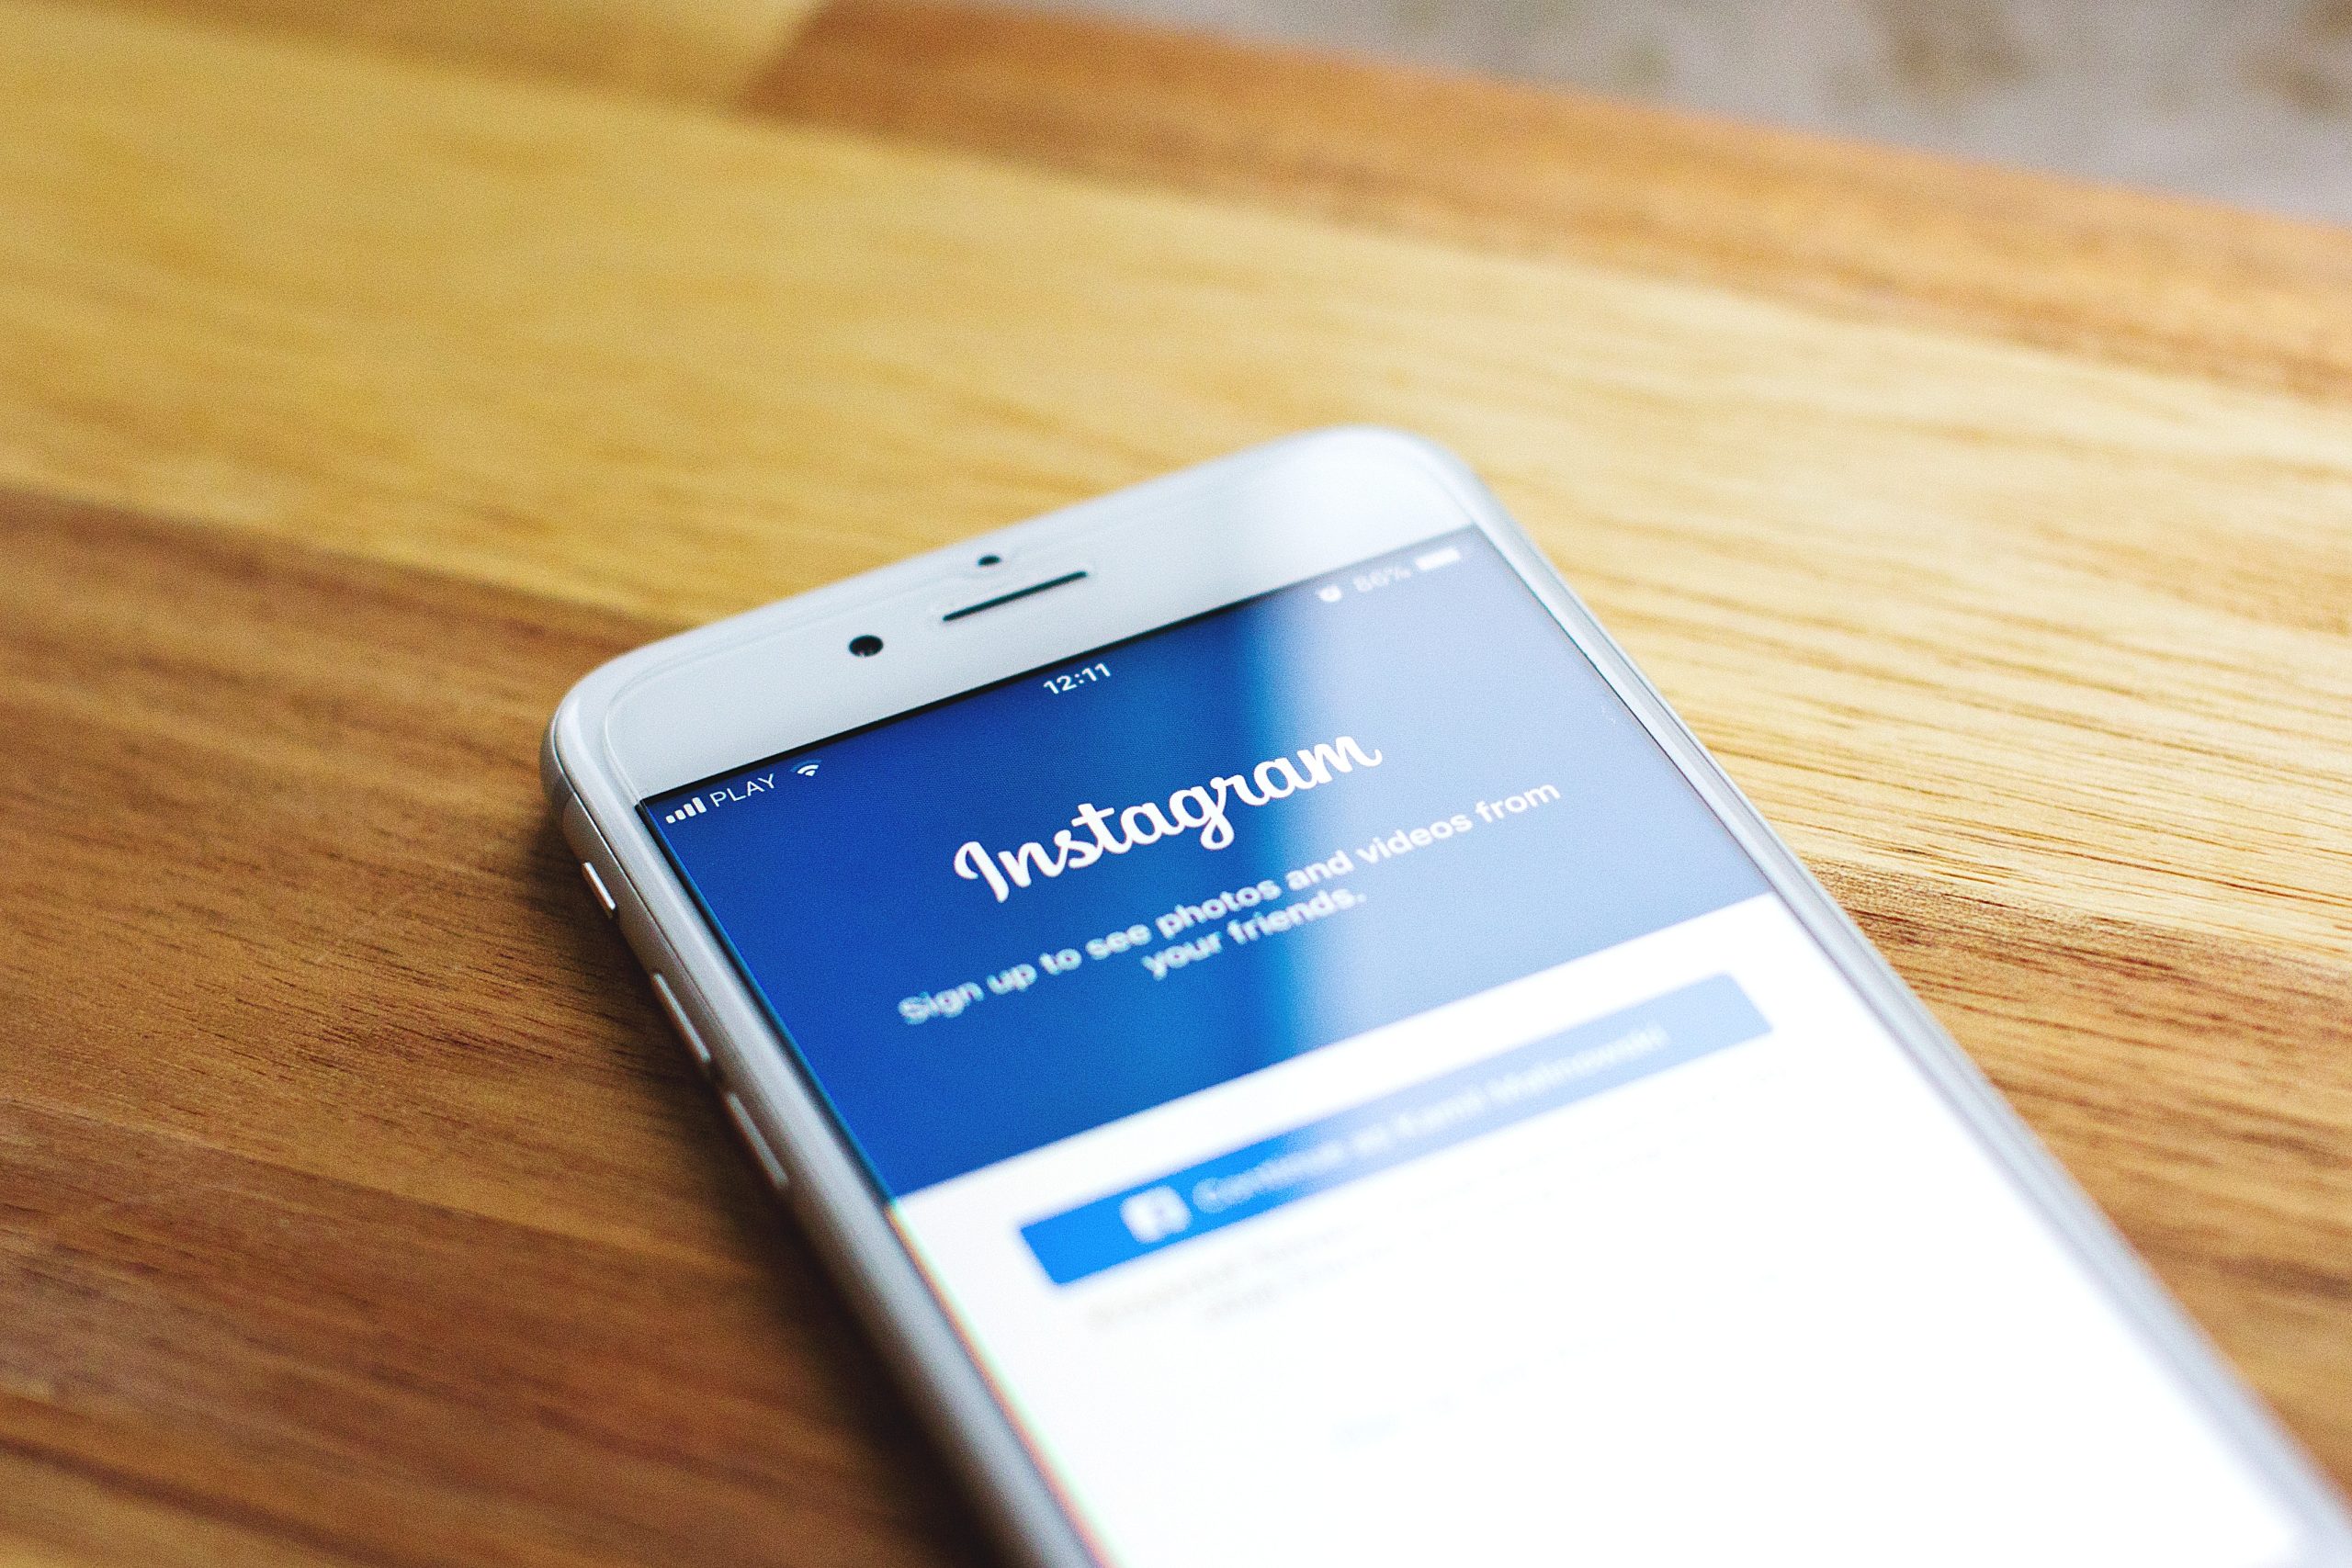 Buying Followers as the Starting Tool for Instagram Promotion